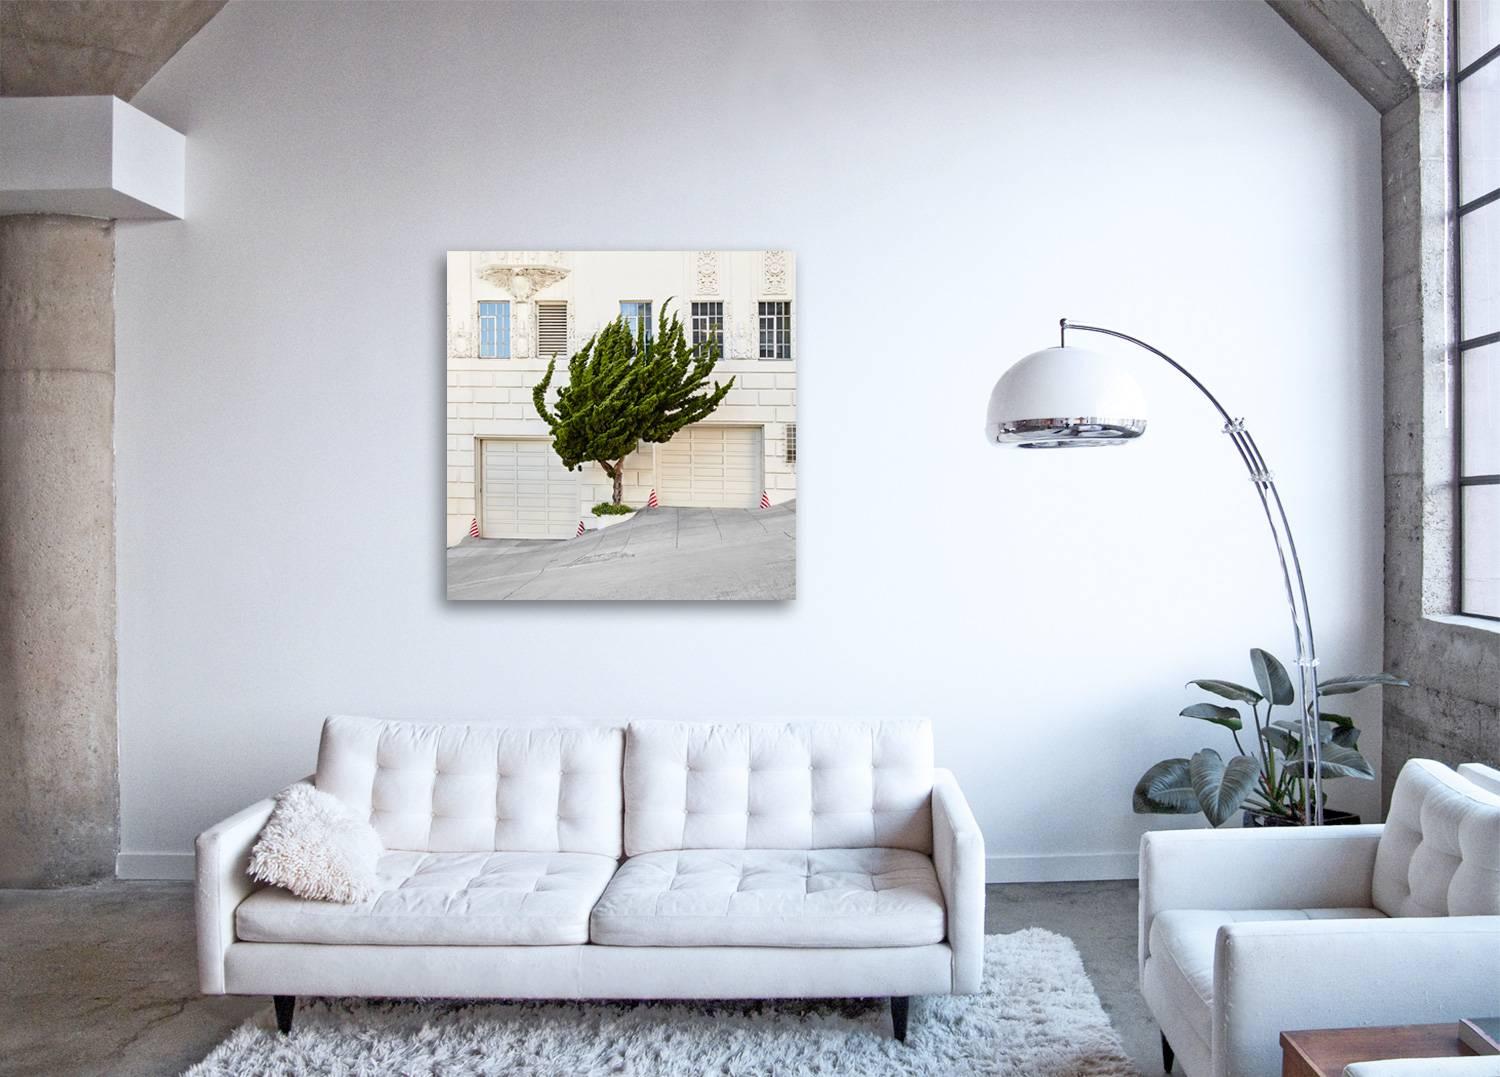 Topiary I - large format photograph of ornamental shaped urban street tree - Contemporary Print by Frank Schott